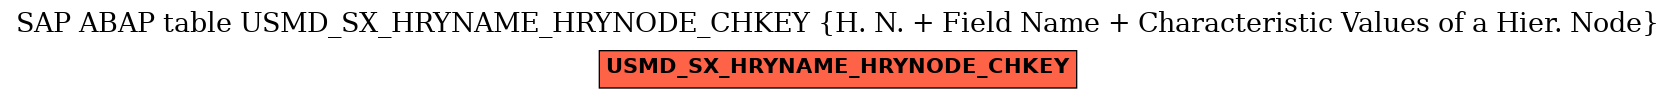 E-R Diagram for table USMD_SX_HRYNAME_HRYNODE_CHKEY (H. N. + Field Name + Characteristic Values of a Hier. Node)